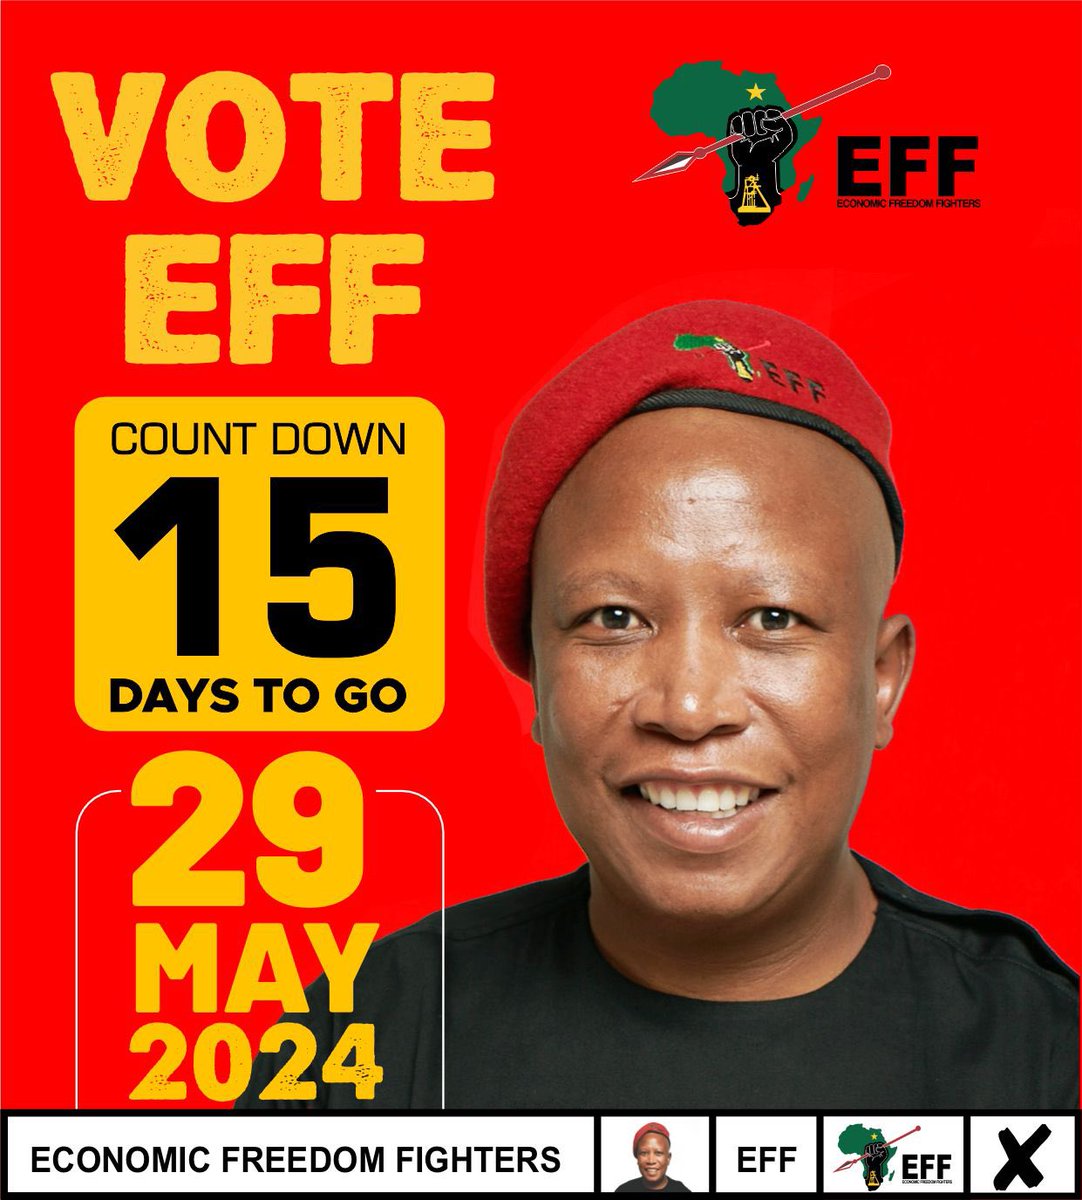 Battle of #1994isOur2024
Your #VoteEFF is your Voice!
You're the #JuliusMalema of your AREA👌🏼
Aluta continua🚩
It's not yet #Uhuru
#SOUTHAFRICAN
#NationalShutdown